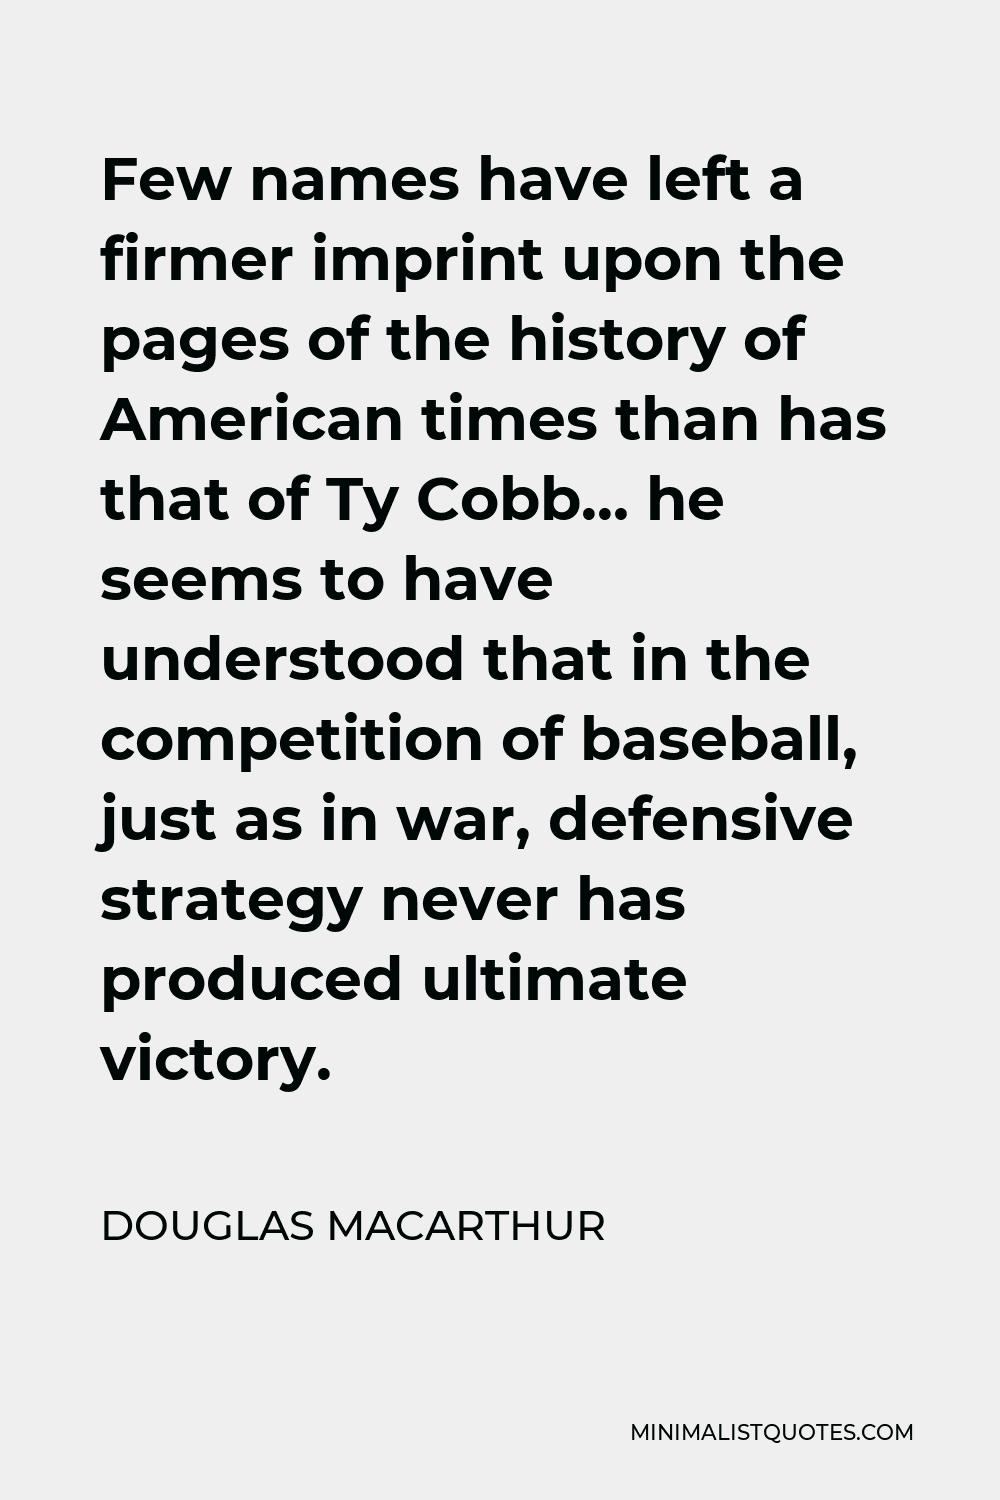 Douglas MacArthur Quote - Few names have left a firmer imprint upon the pages of the history of American times than has that of Ty Cobb… he seems to have understood that in the competition of baseball, just as in war, defensive strategy never has produced ultimate victory.